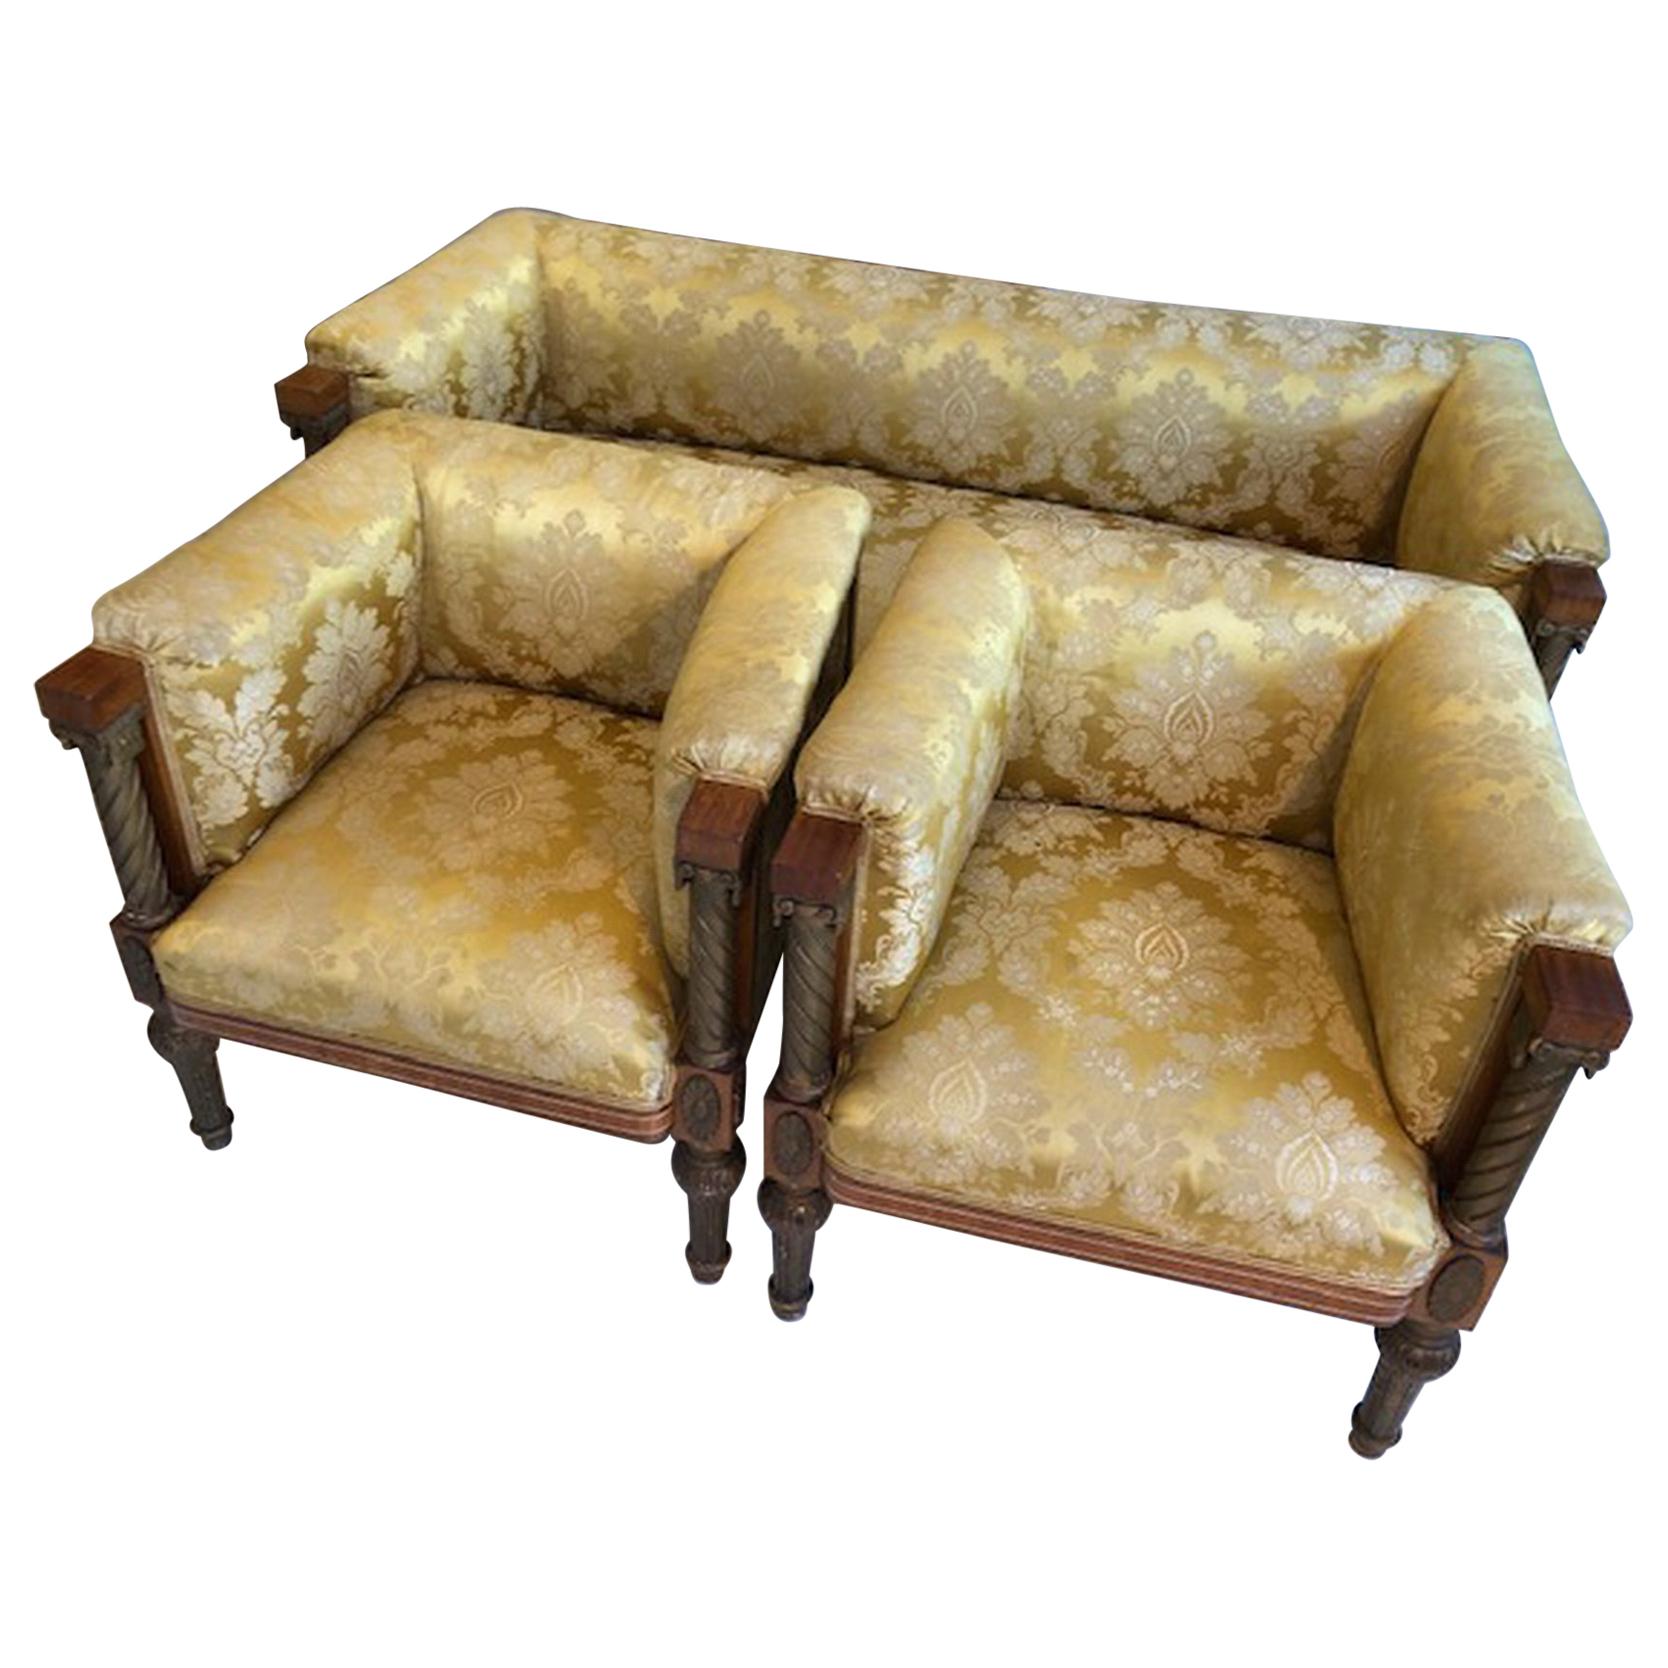 Classicism Seating Group Furniture in Empire Style For Sale